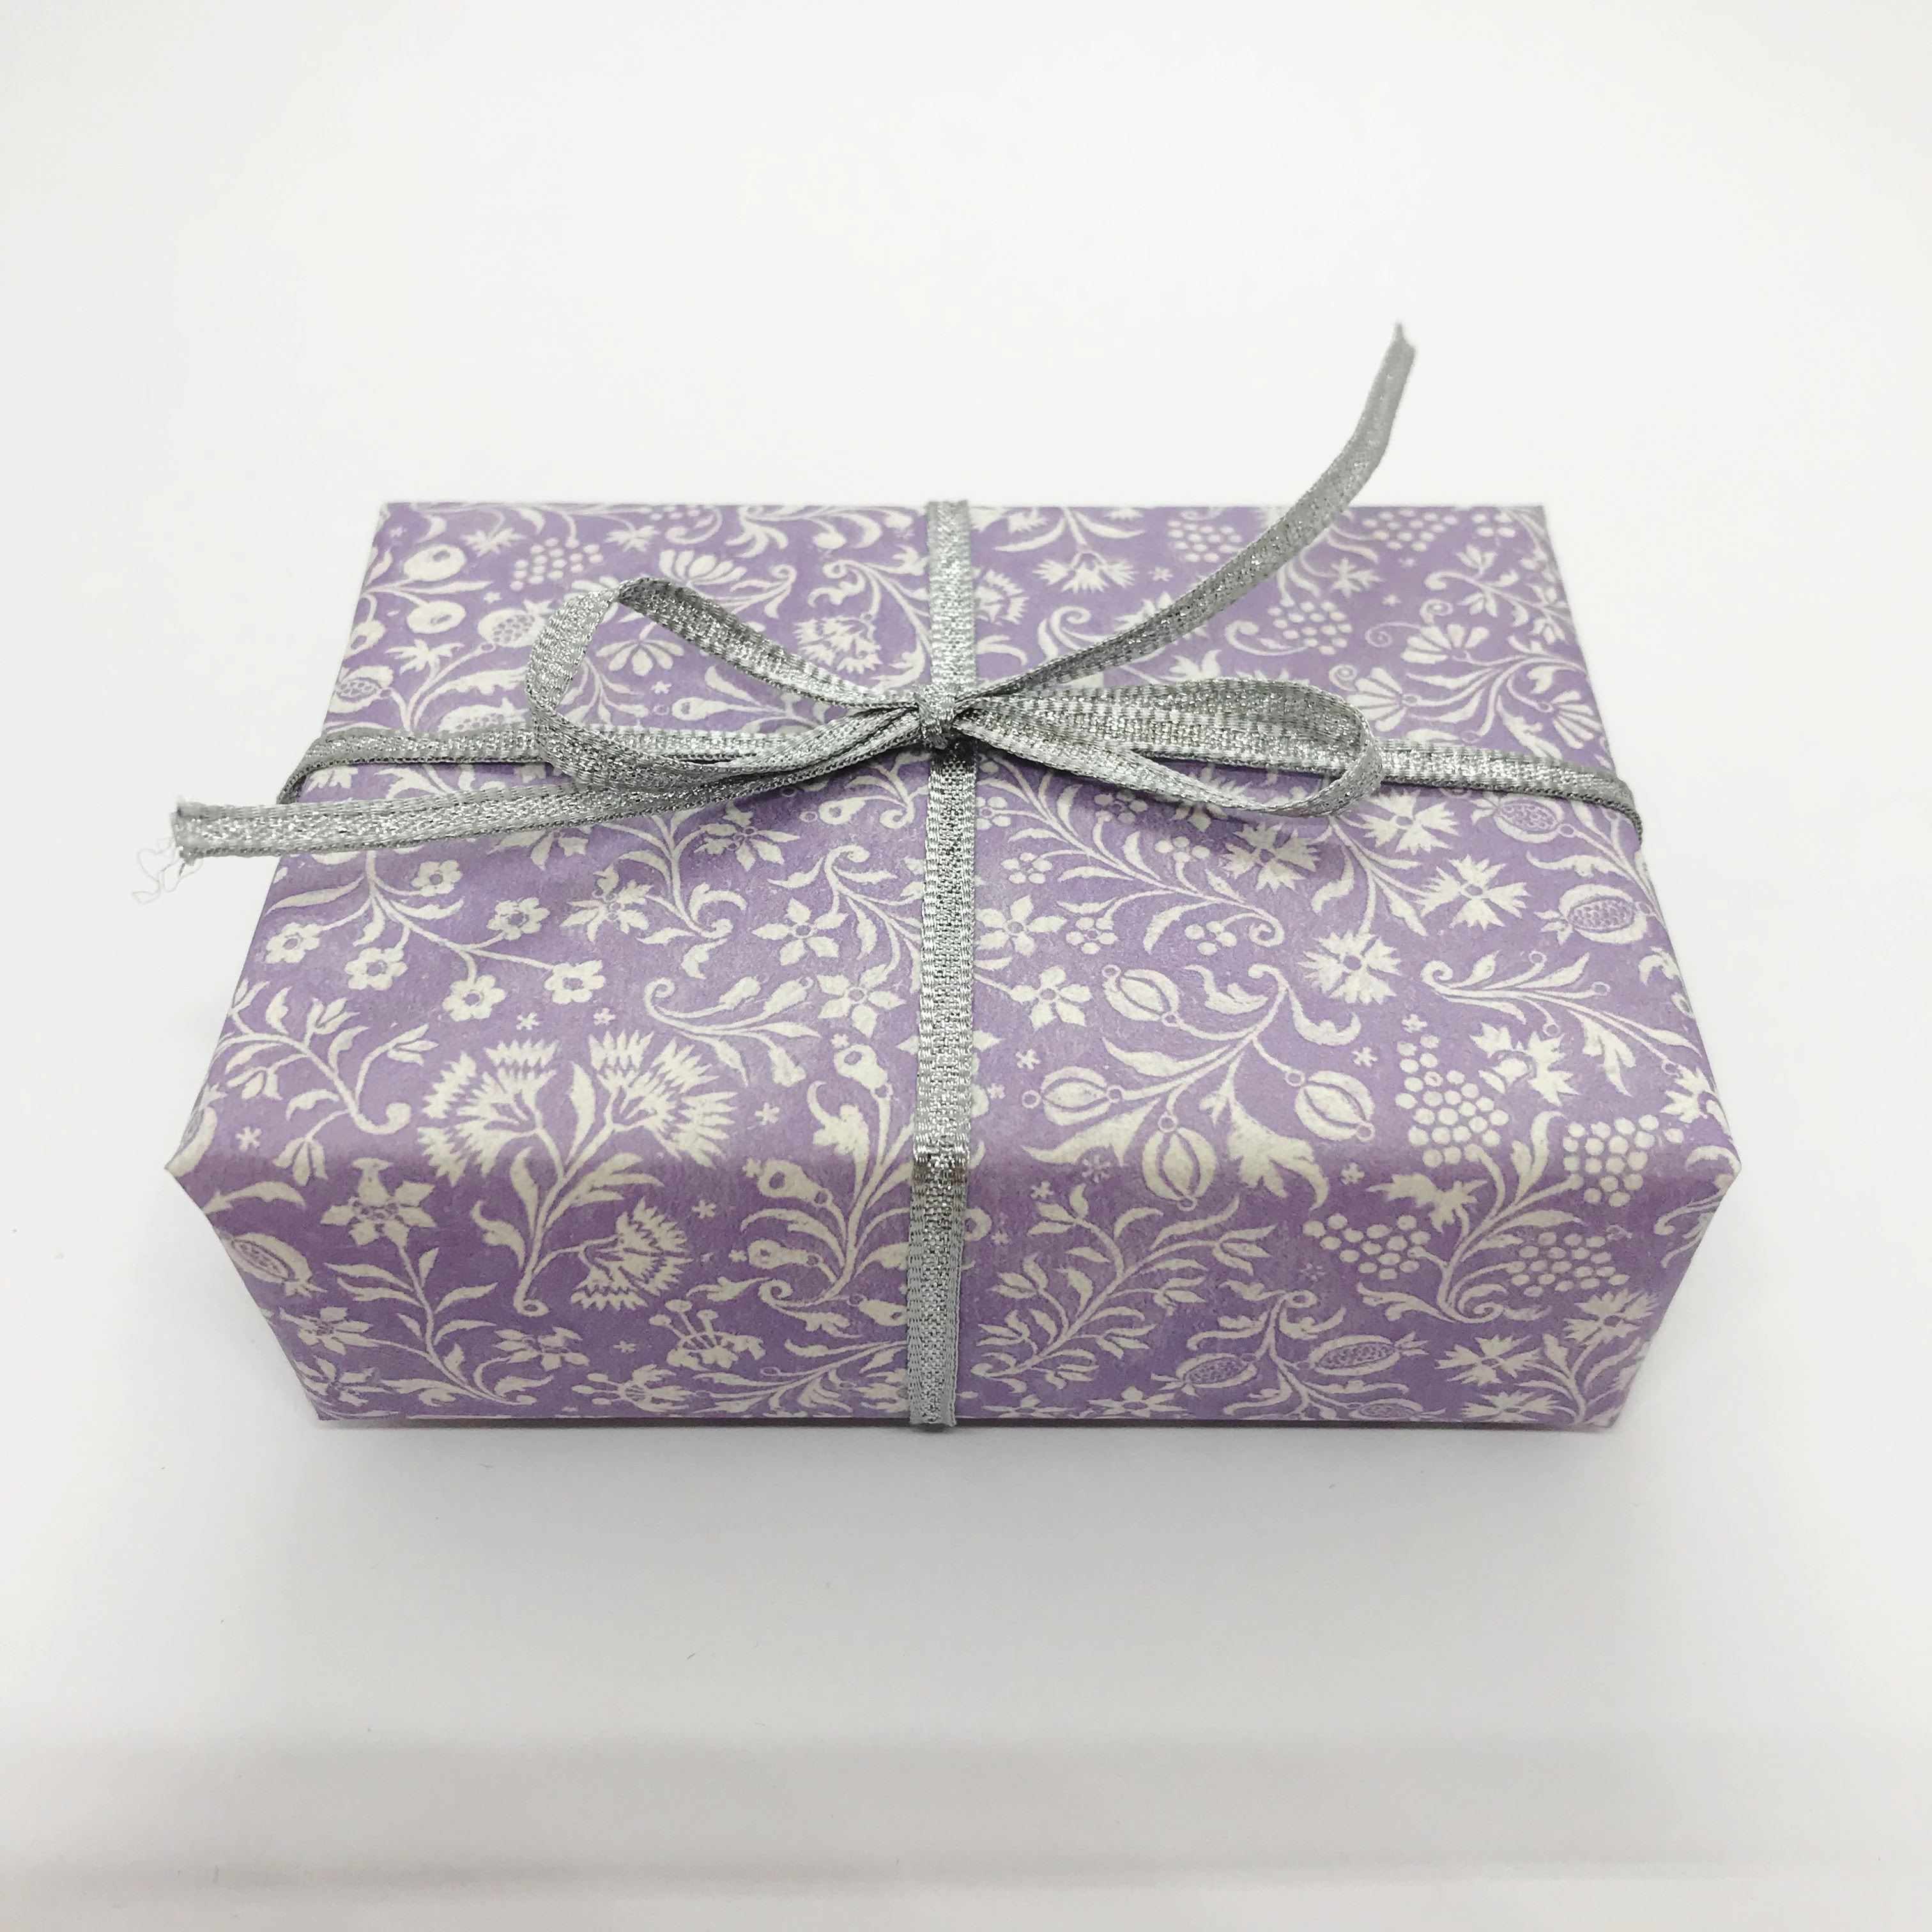 Dior luxury wrapping paper for my fellow florsits. Shipping all thru U, Gift Wrapping Supplies